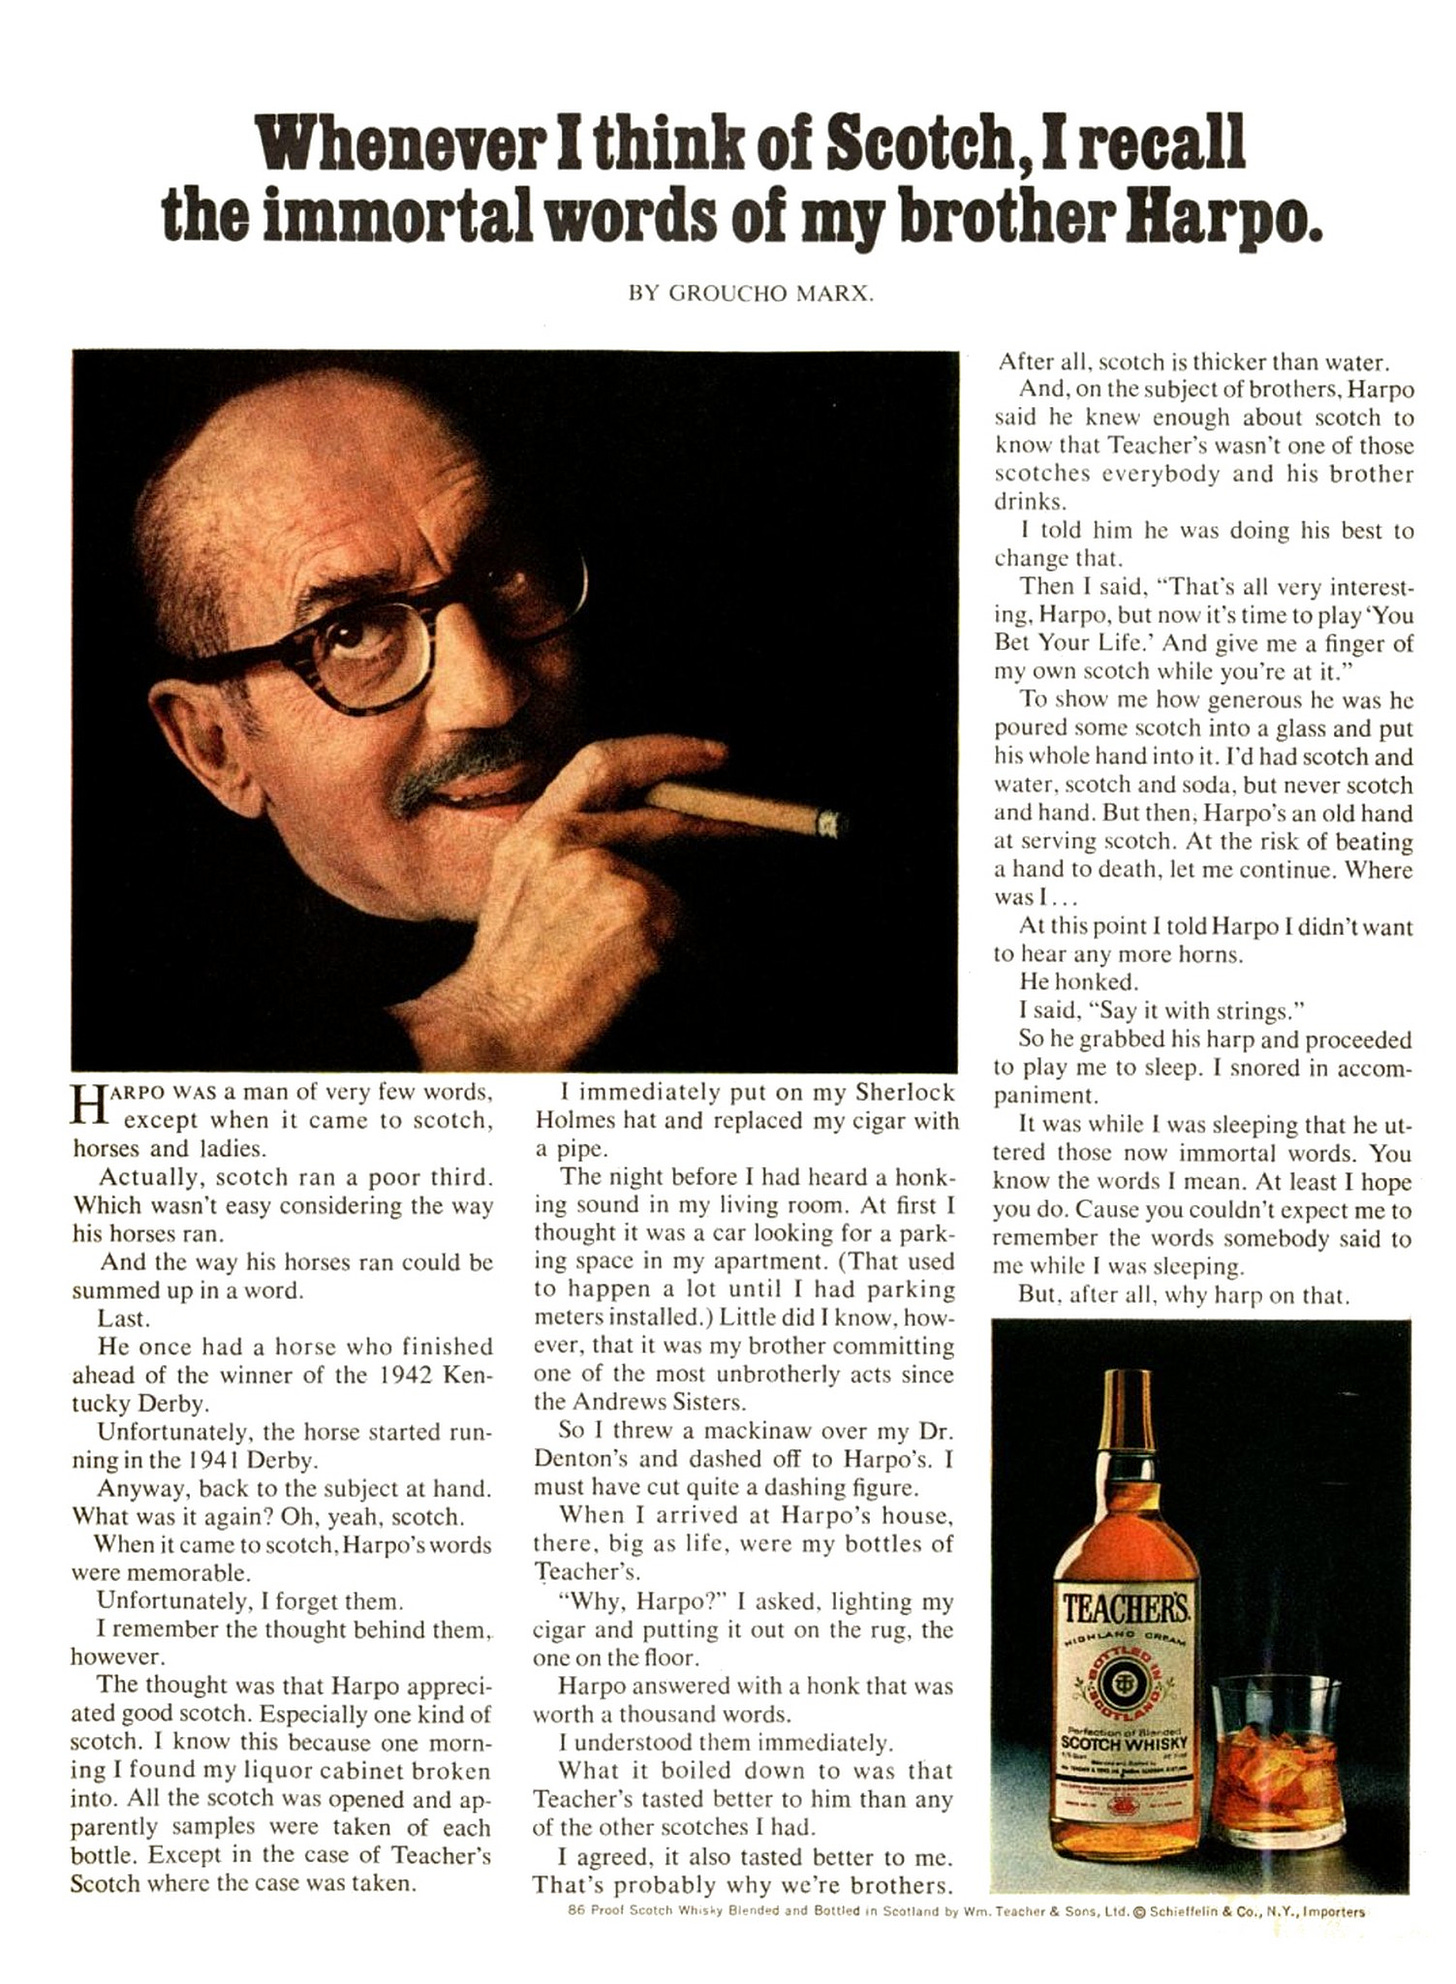 1973 Whenever I think of Scotch, I recall the immortal words of my brother Harpo. by Groucho Marx. Teacher's